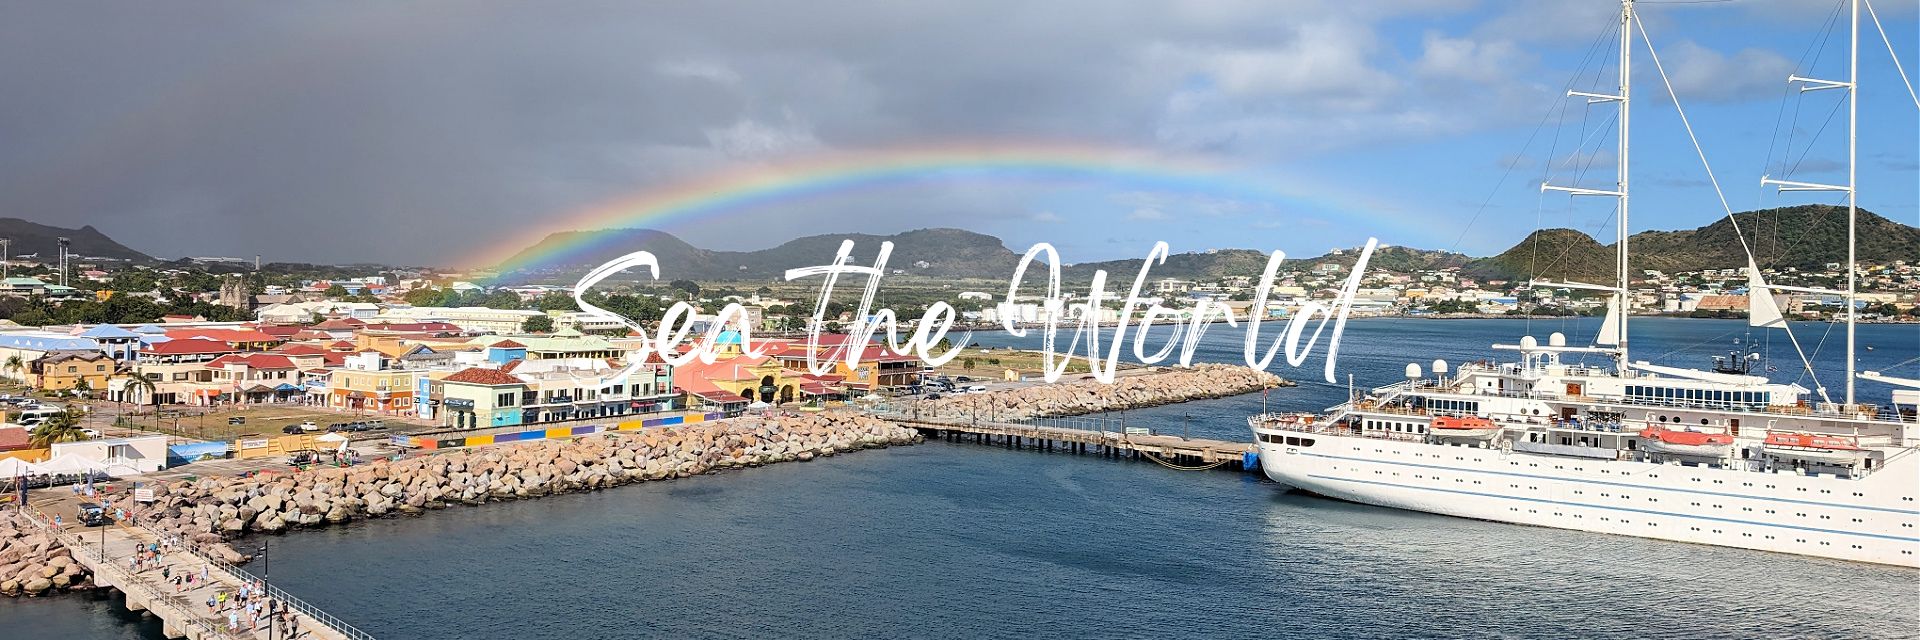 Photo of a sailing ship in the port of St Kitts. There are colourful shops on shore with a rainbow stretching across the sky. The text on the photo reads "Sea the World". 